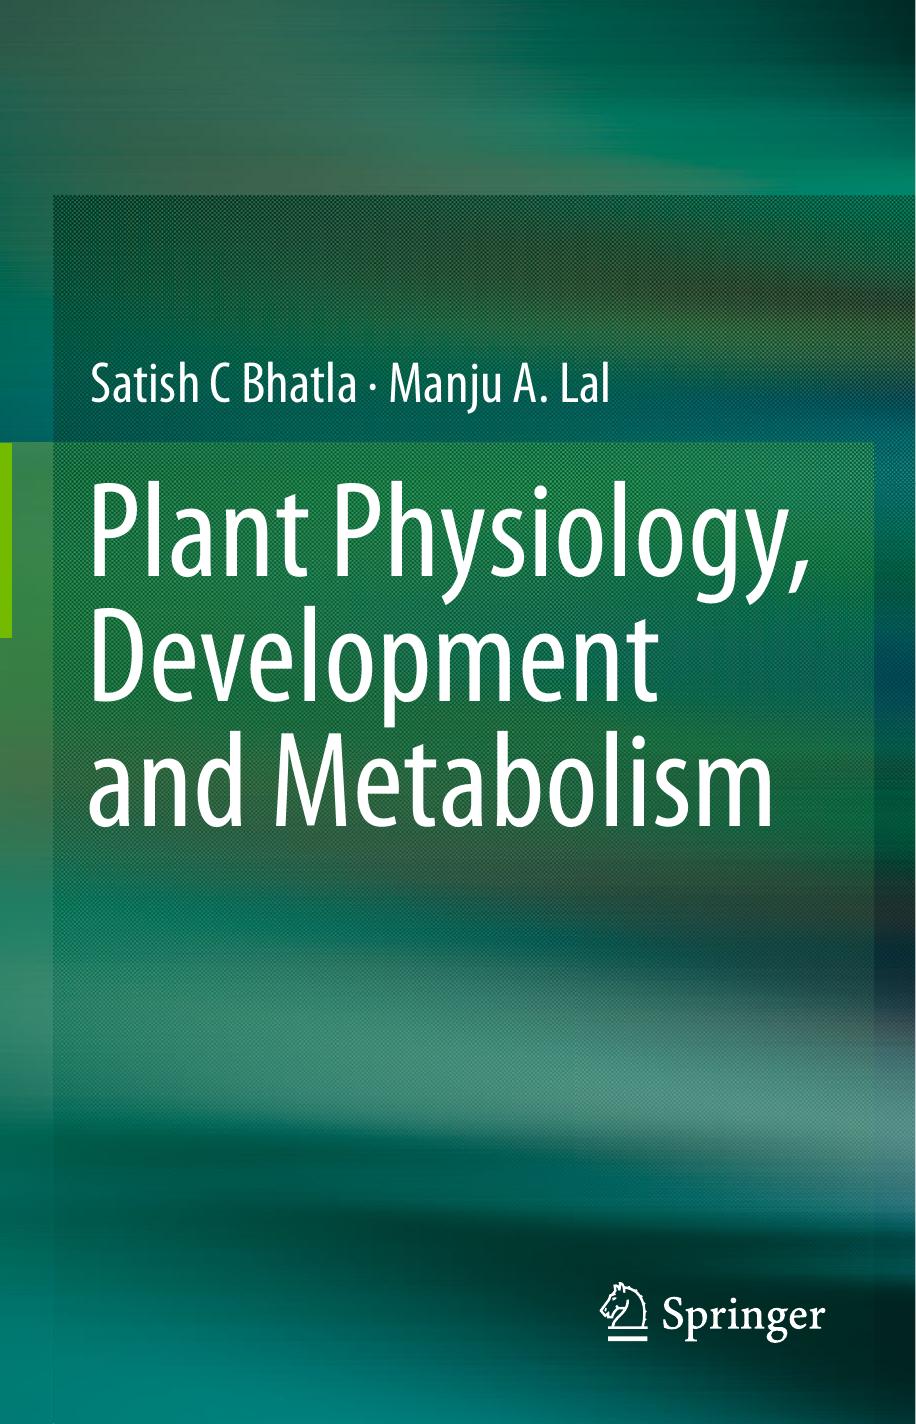 Plant Physiology, Development and Metabolism ( PDFDrive ), 2018